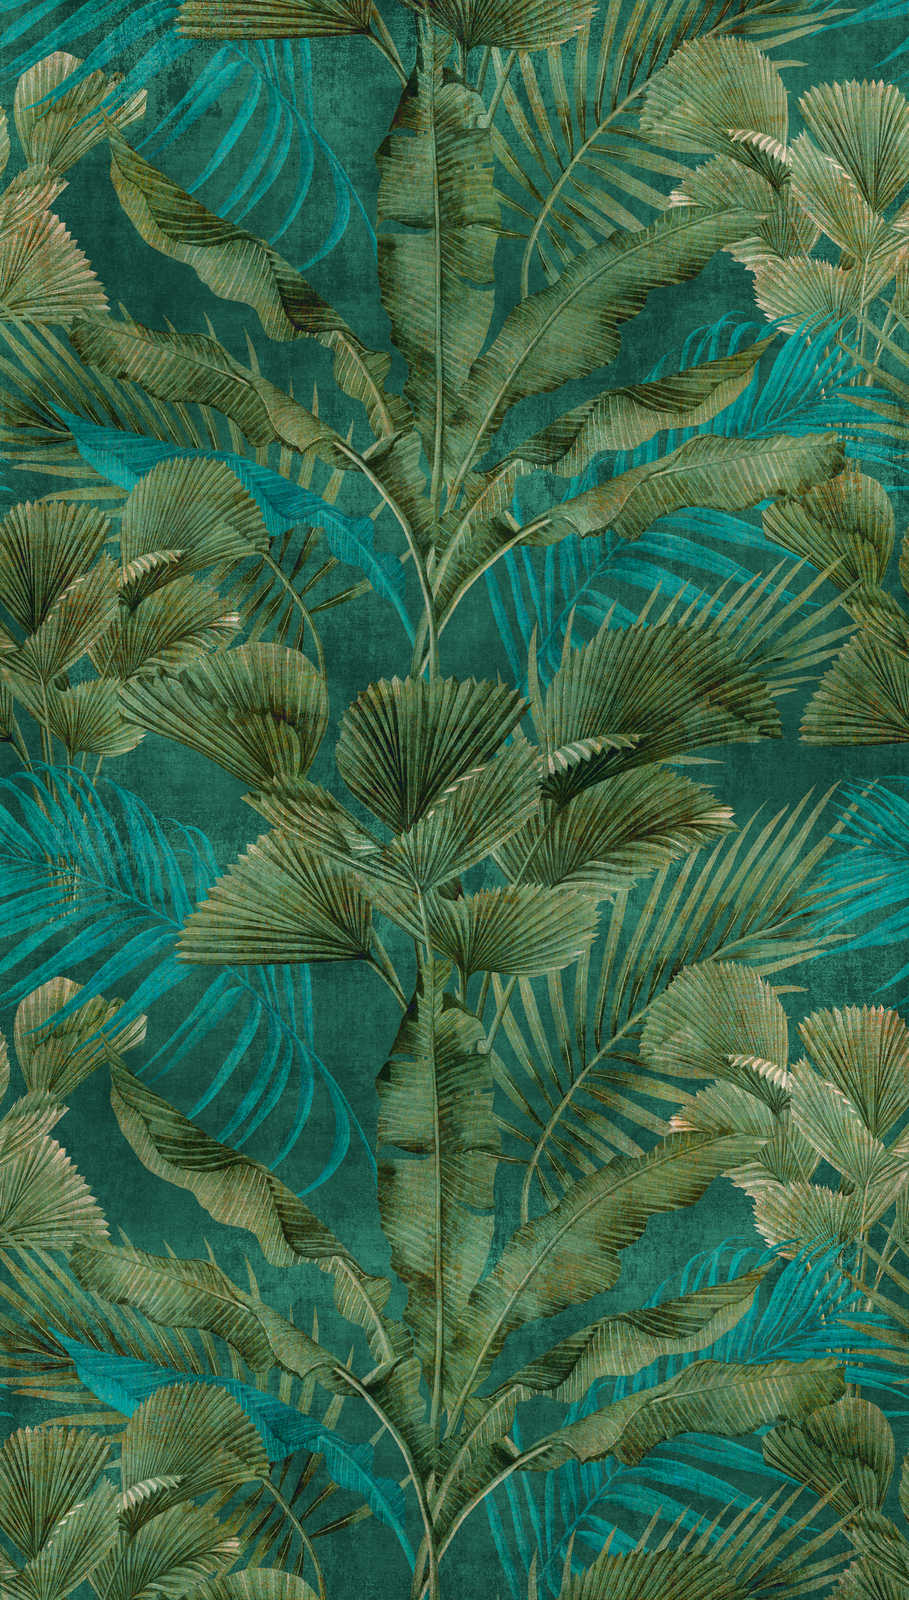             Non-woven wallpaper with various jungle leaves - green, blue
        